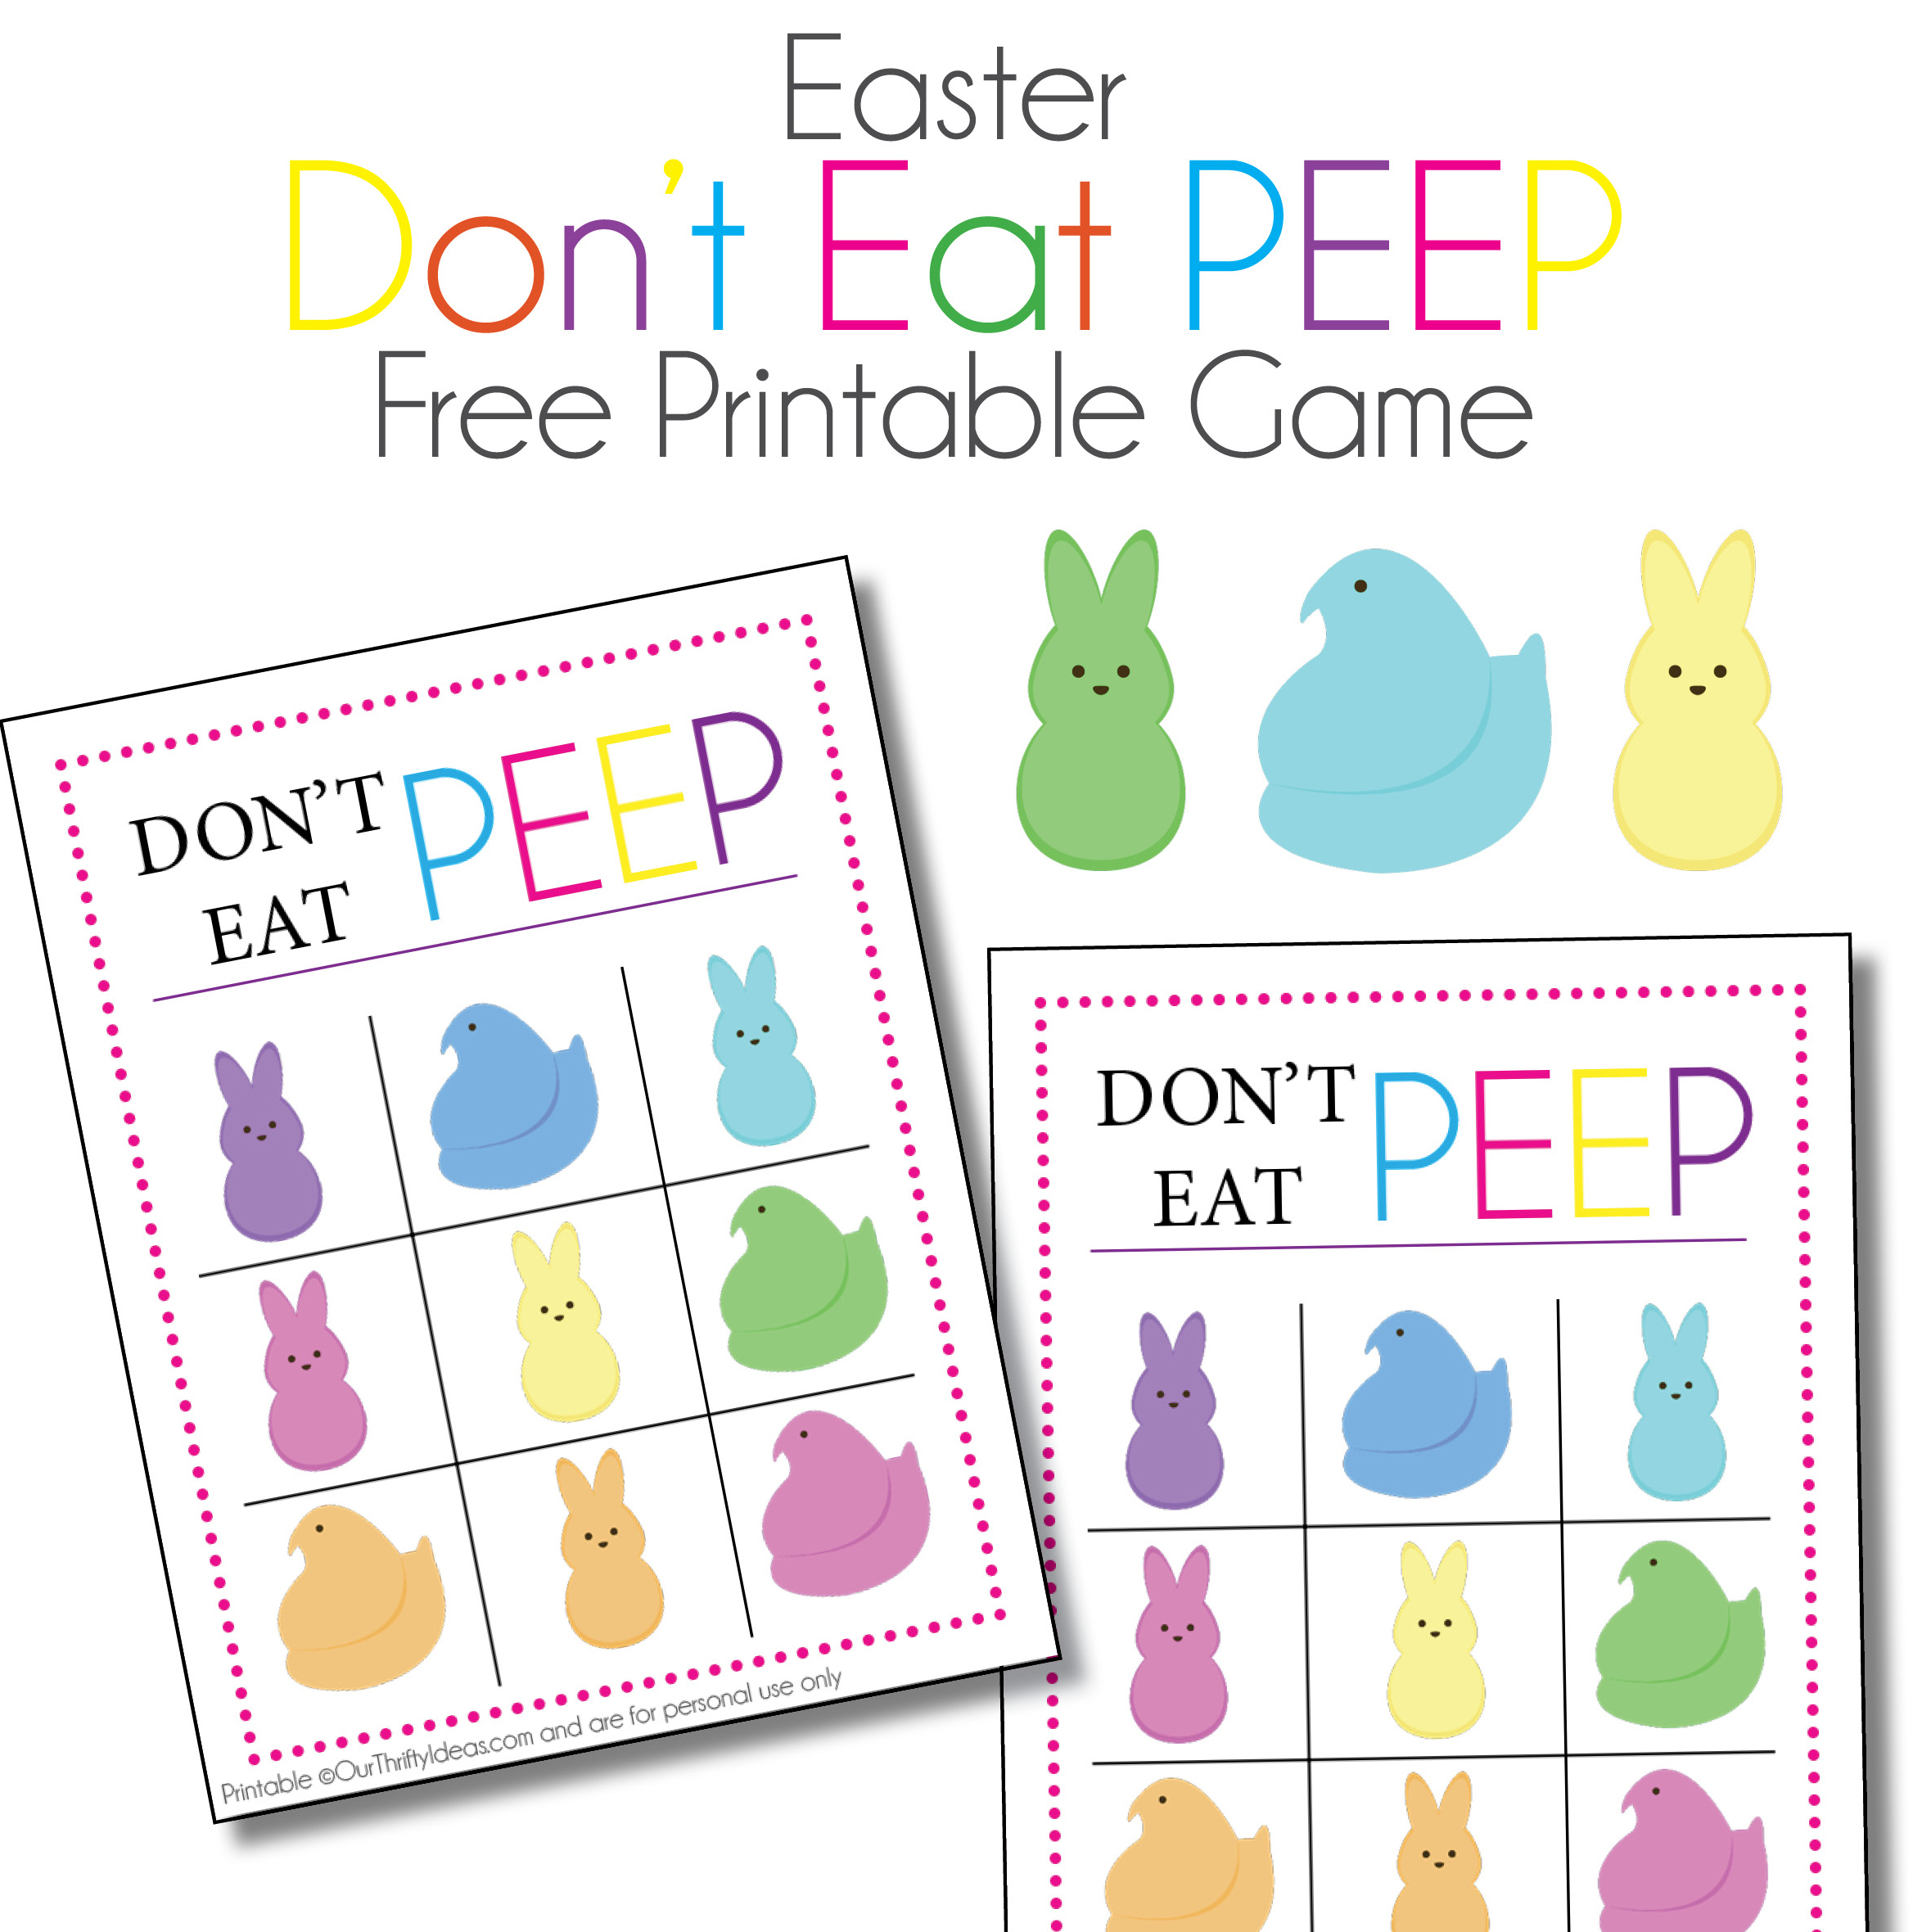 don't eat peep easter printable game - our thrifty ideas